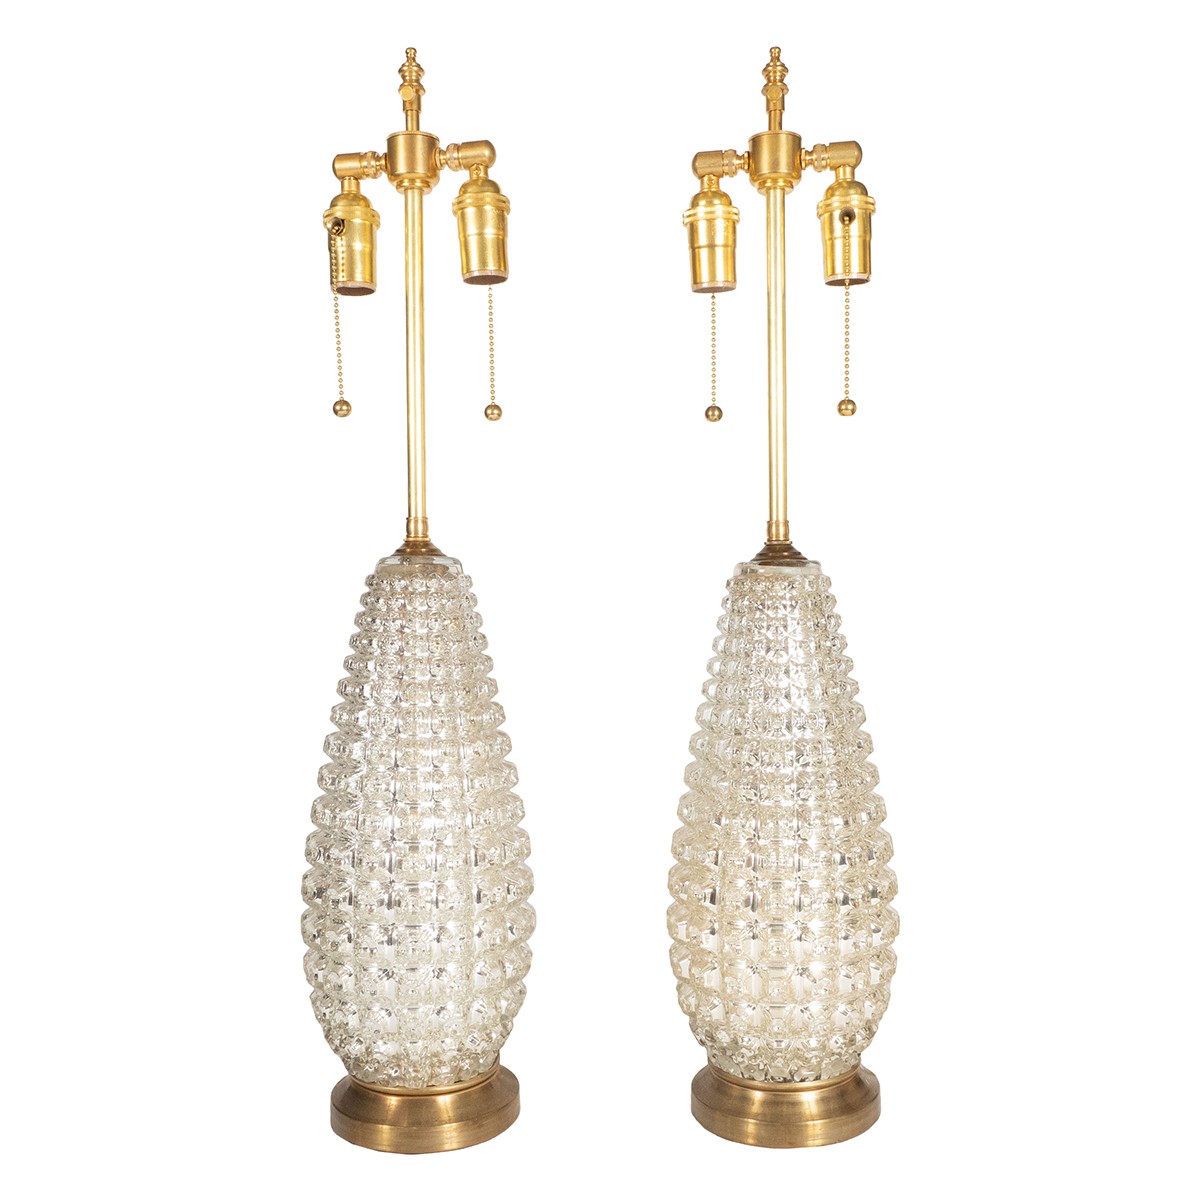 Pair of faceted mercury glass table lamps